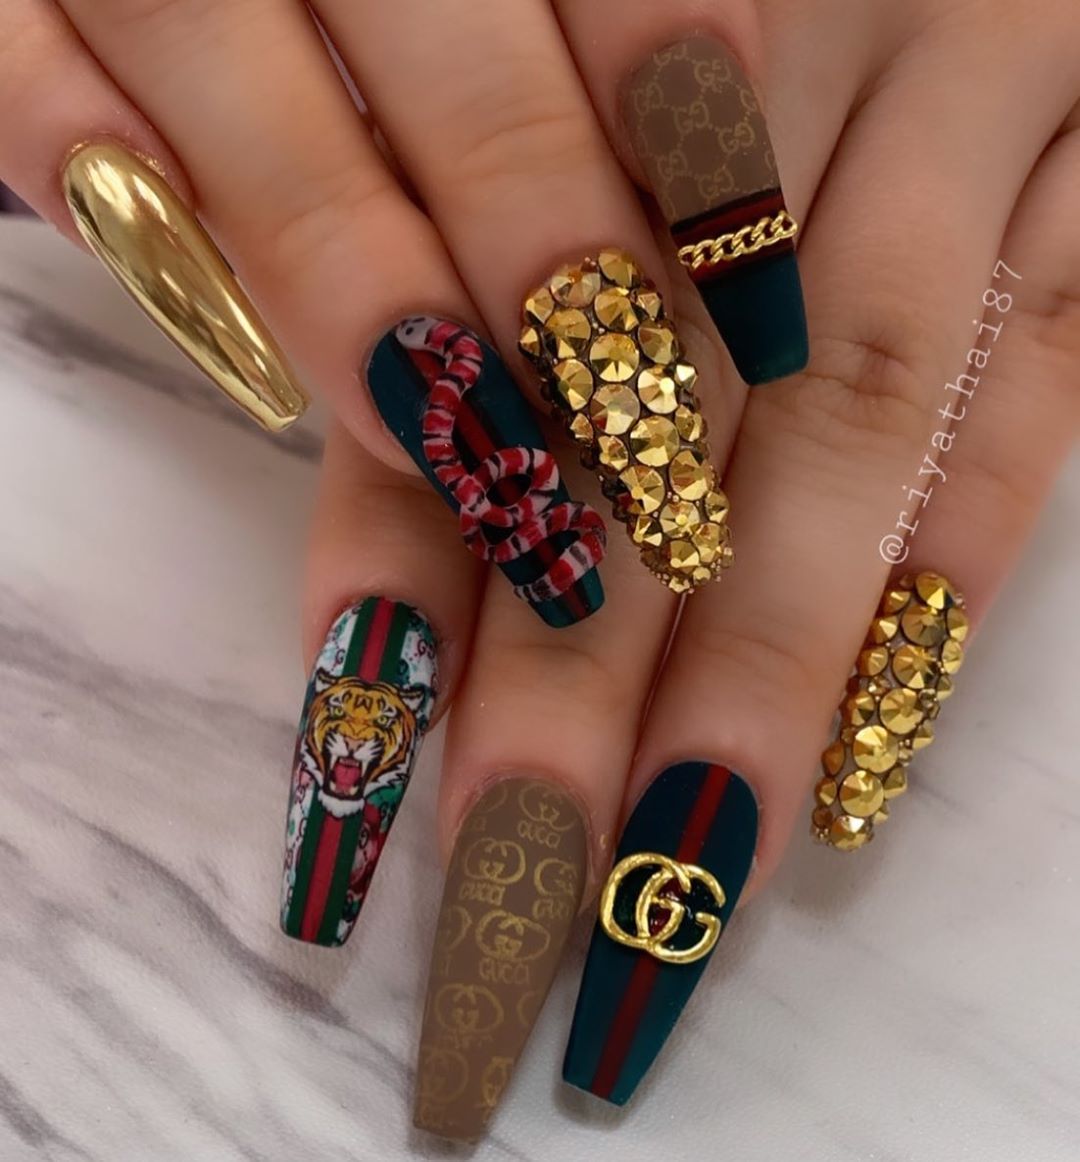 Image may contain: one or more people and closeup | Gucci nails, Nails, Nail  decals